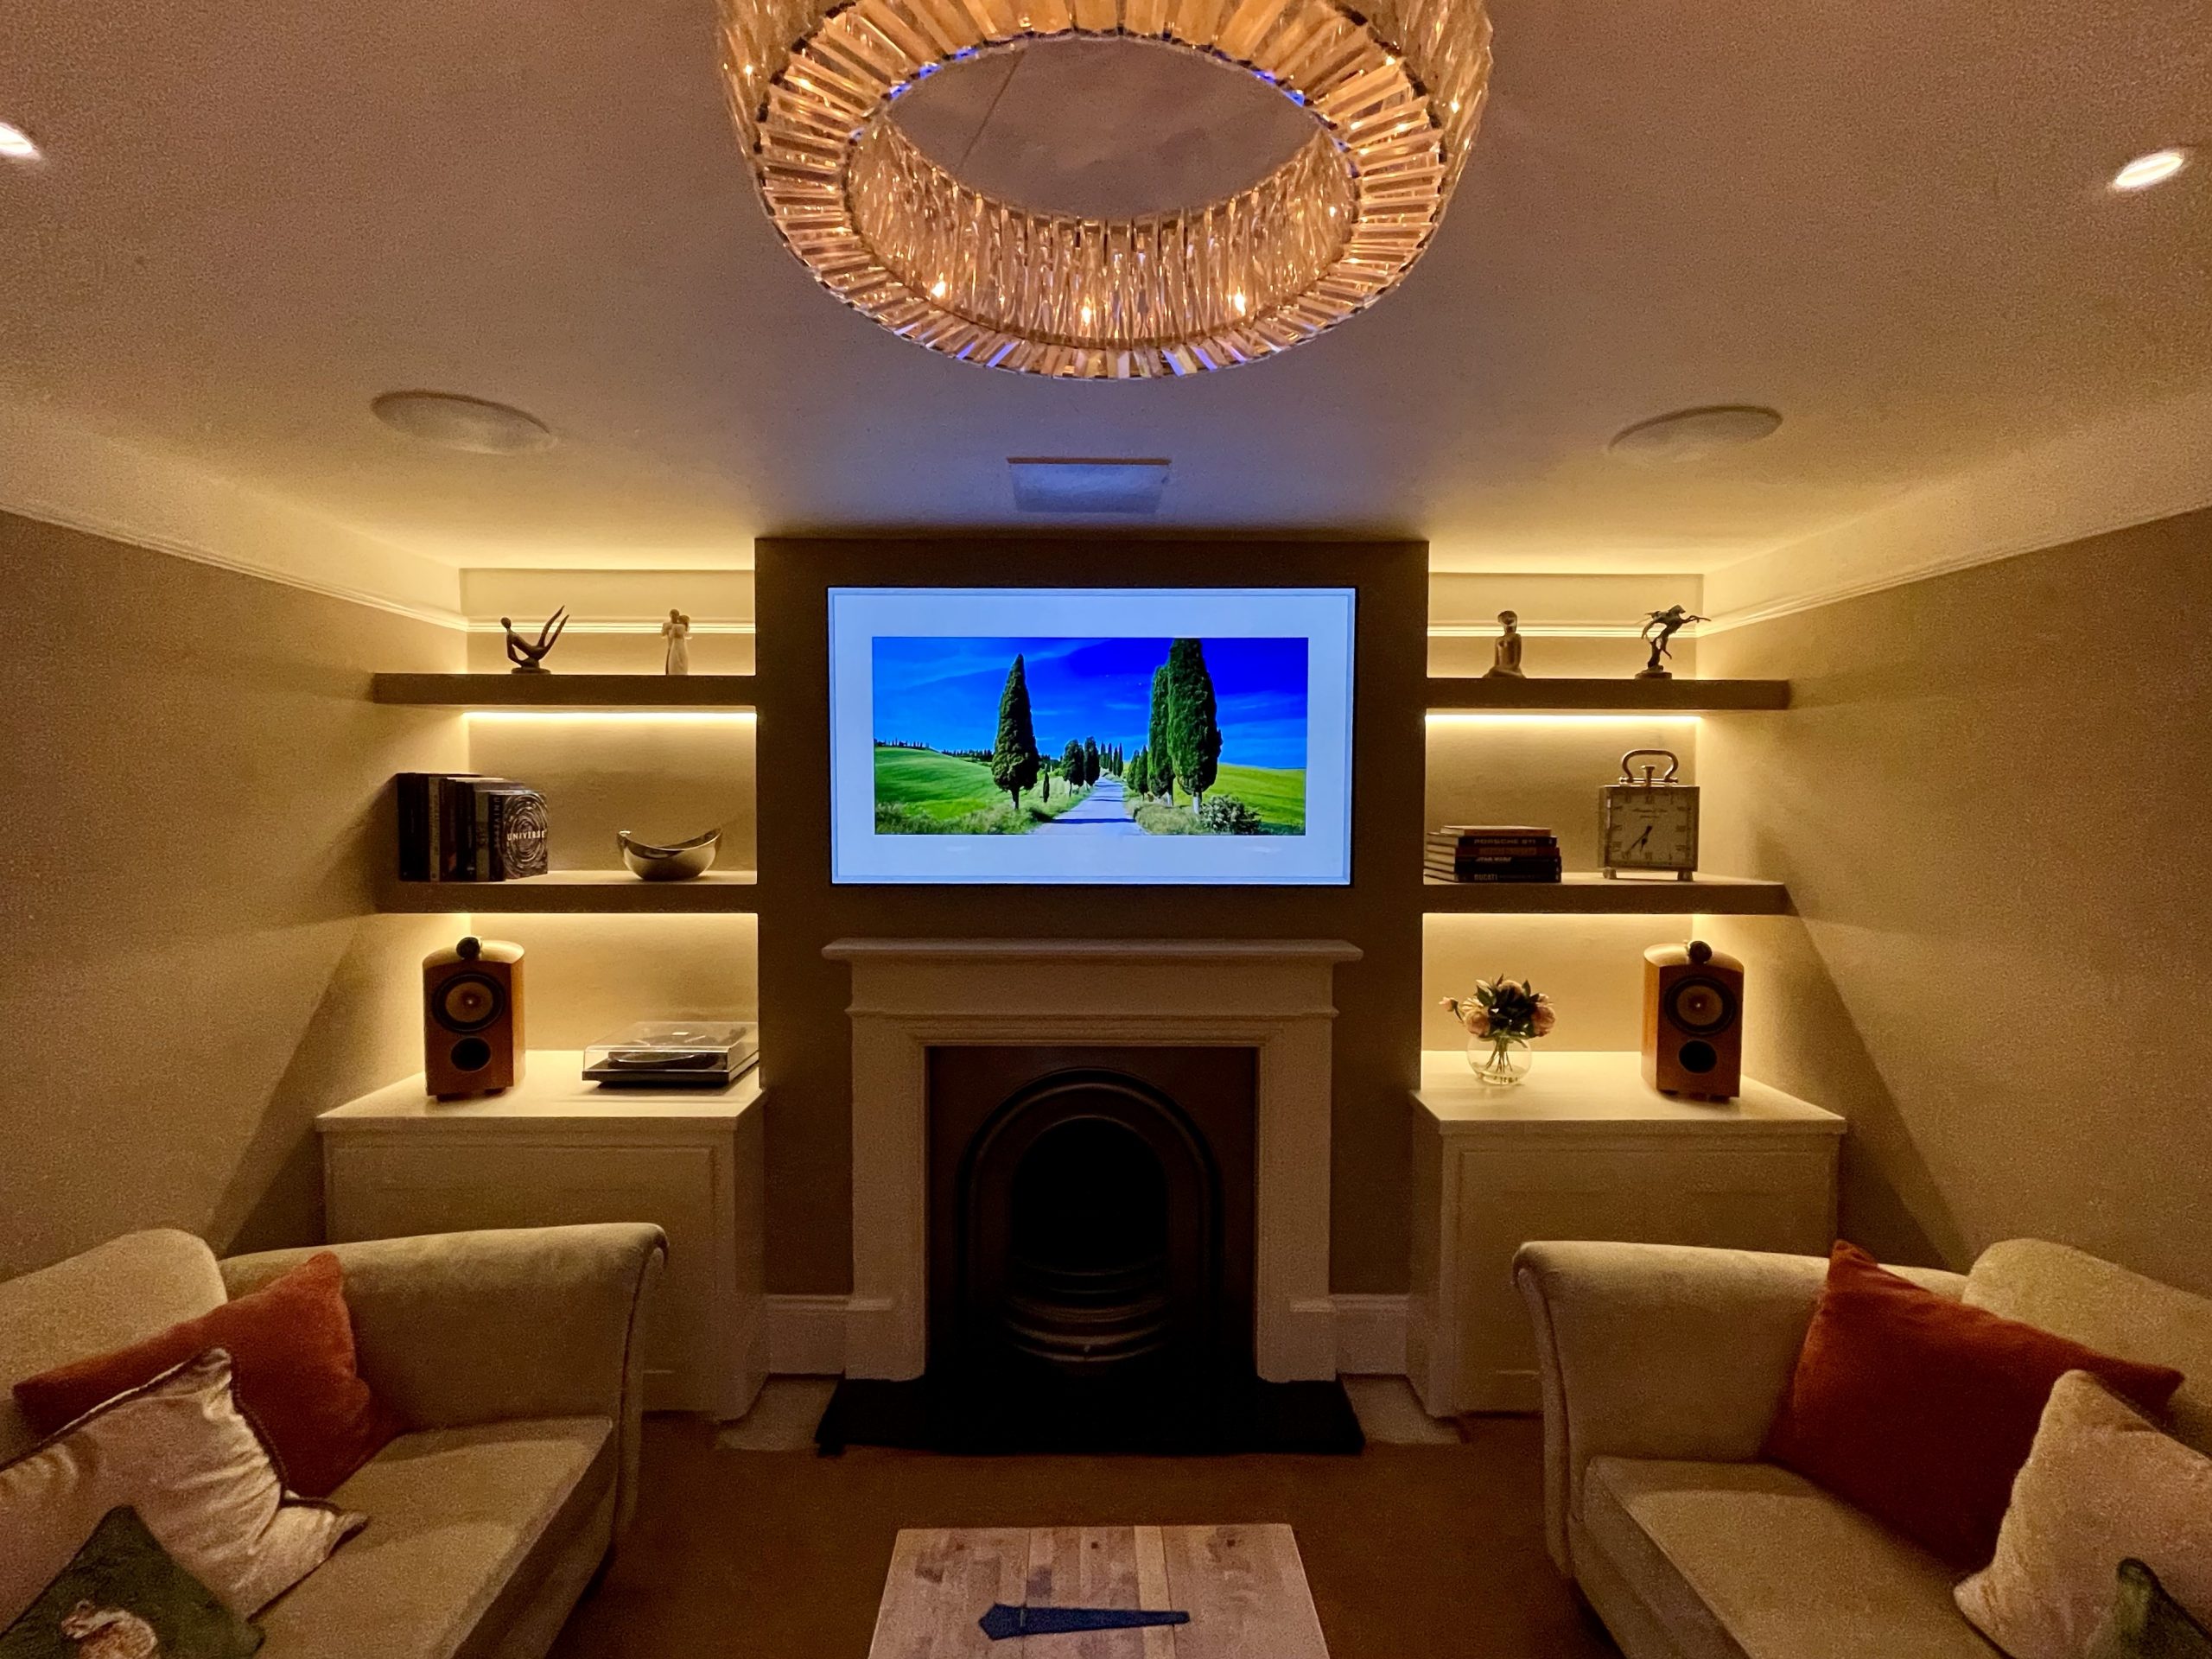 Lutron lighting in home cinema media room, with TV above fireplace and in ceiling speakers